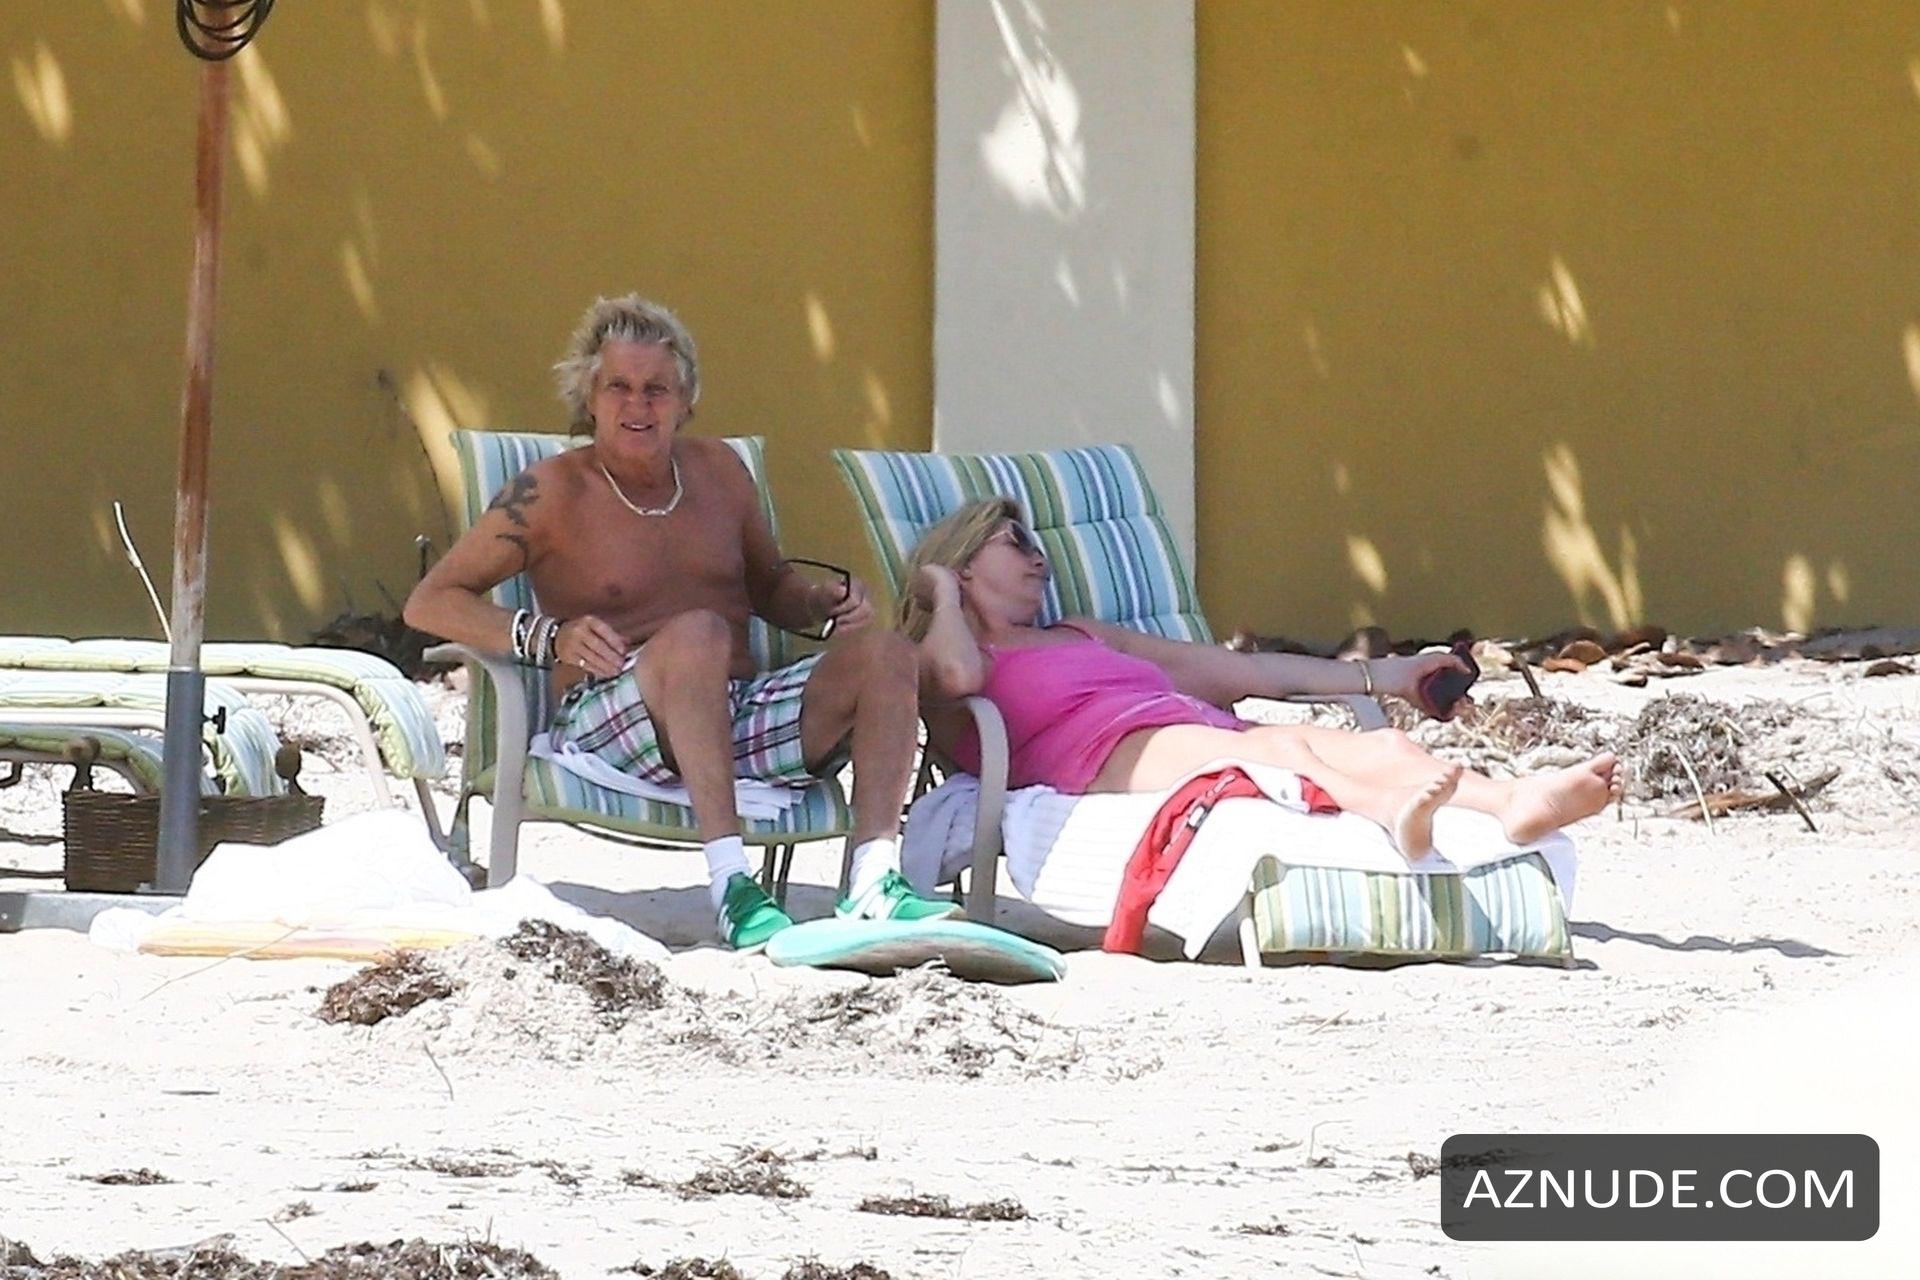 Penny lancaster topless